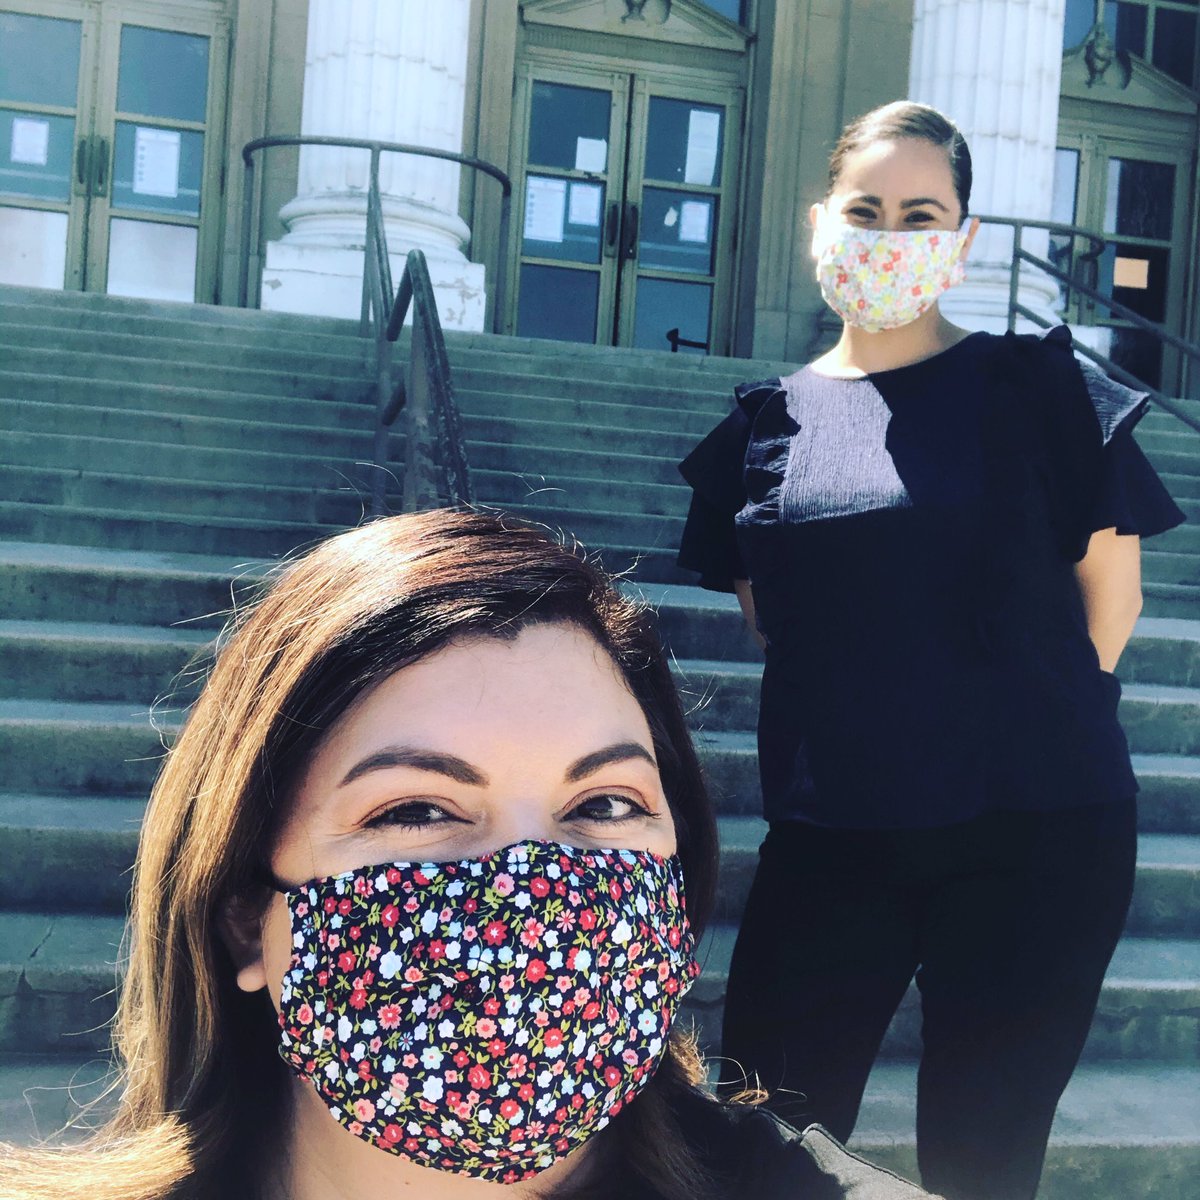 Happy #cityhallselfie Day! Annual tradition with this rockstar. ⭐️
This day is hosted by Emerging Local Government Leaders (#elgl) to help promote local government pride. We were placed in our roles to serve. #bestmaskwearingselfie #localgovlove #teamstockton